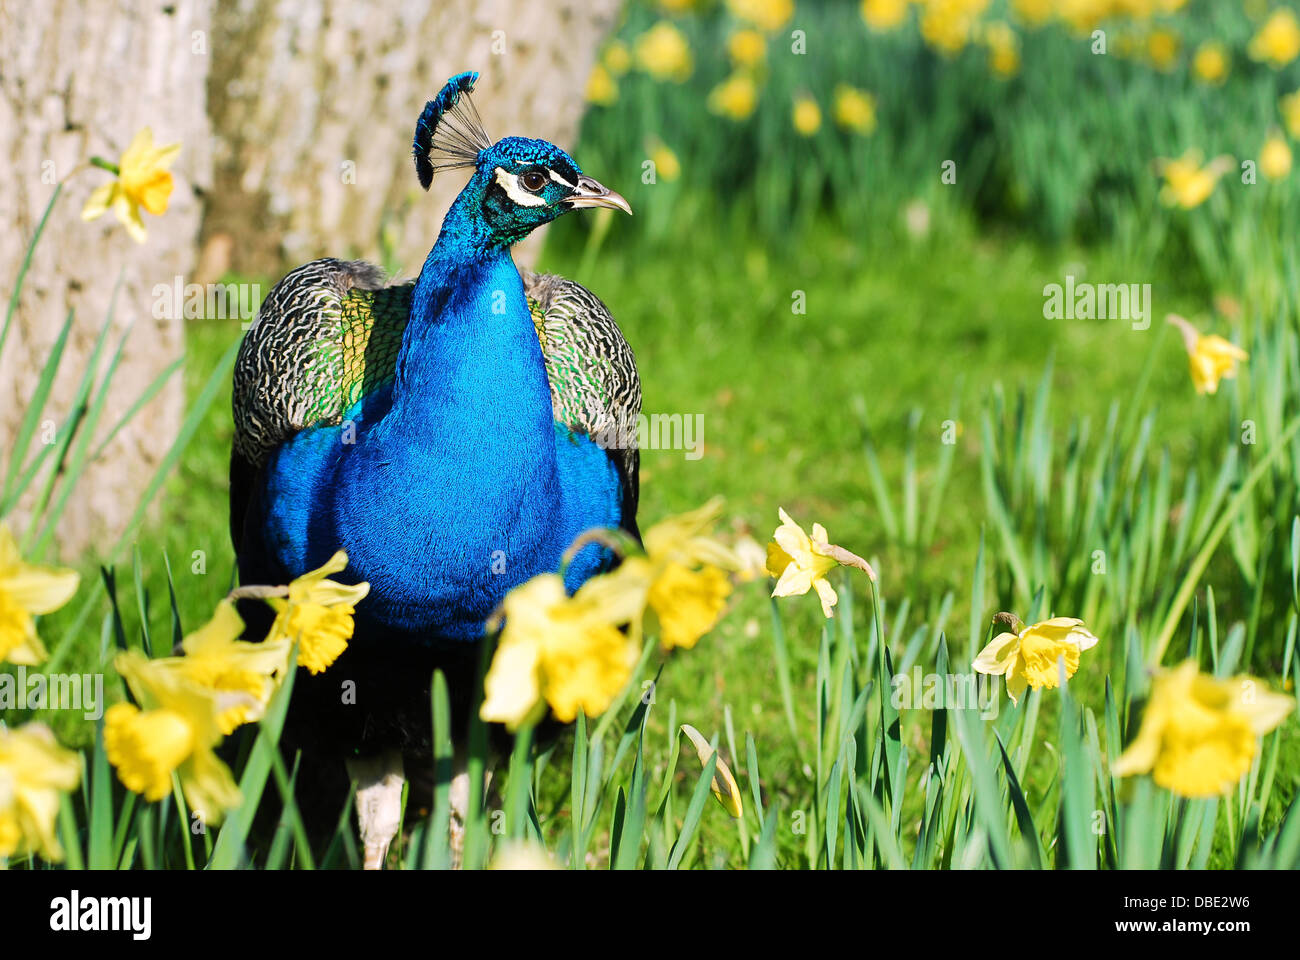 Closeup Indian Peafowl (Pavo cristatus) seen from the front among narcissus flowers Stock Photo